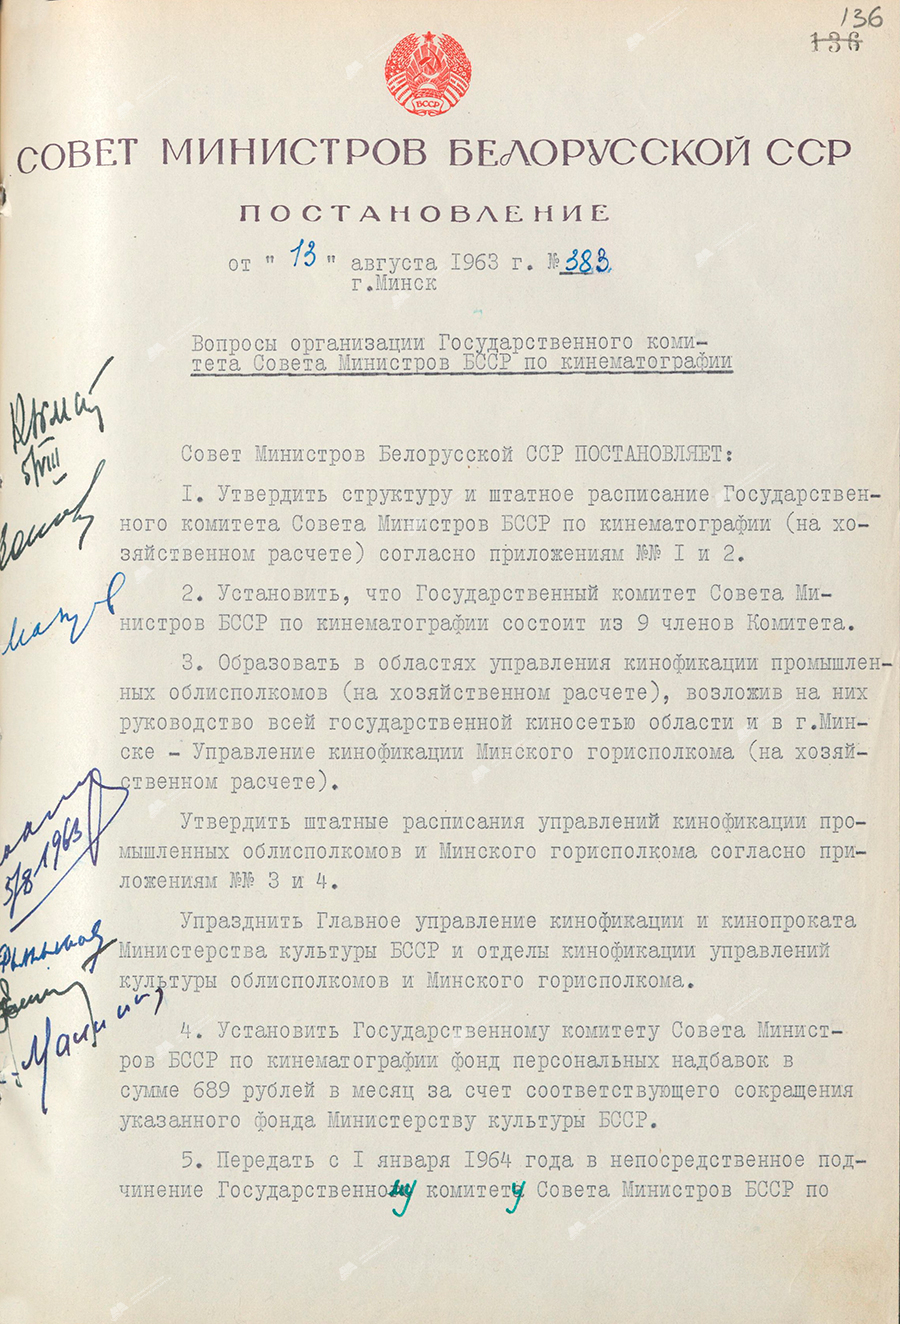 Resolution No. 383 of the Council of Ministers of the BSSR «Issues of the organization of the State Committee of the Council of Ministers of the BSSR on Cinematography»-с. 0